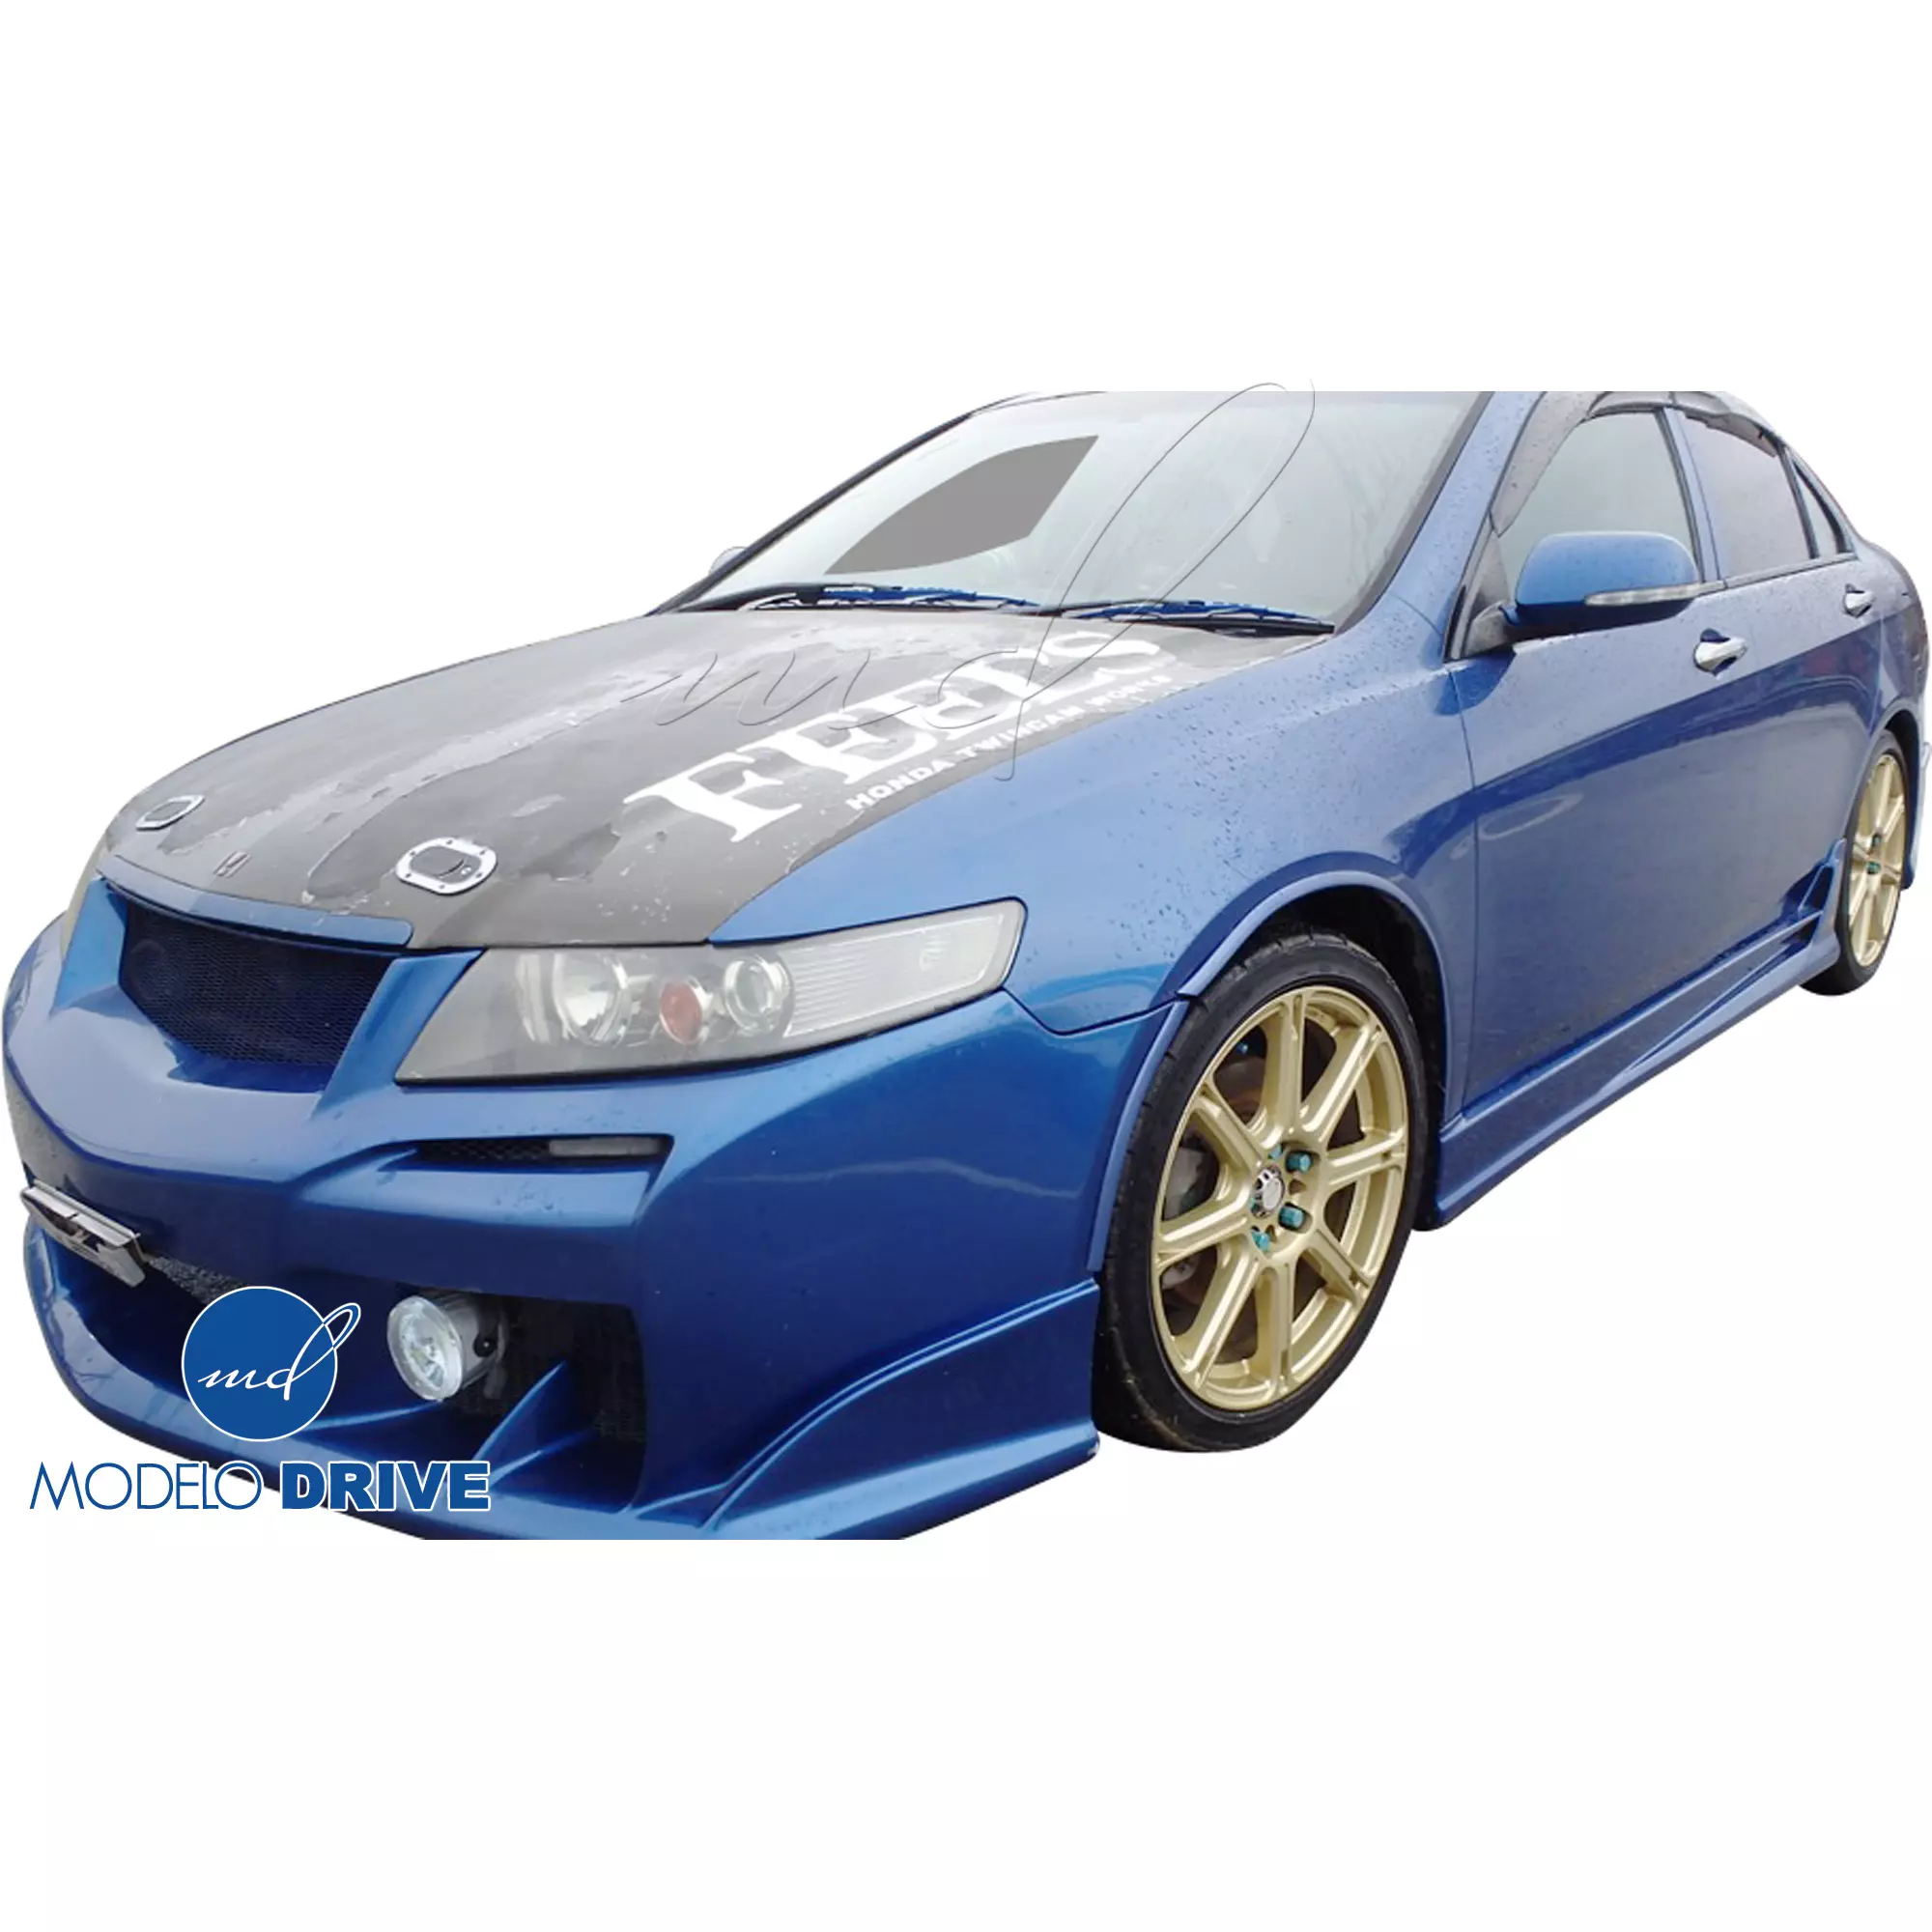 ModeloDrive FRP LSTA Side Skirts > Acura TSX CL9 2004-2008 - Image 10